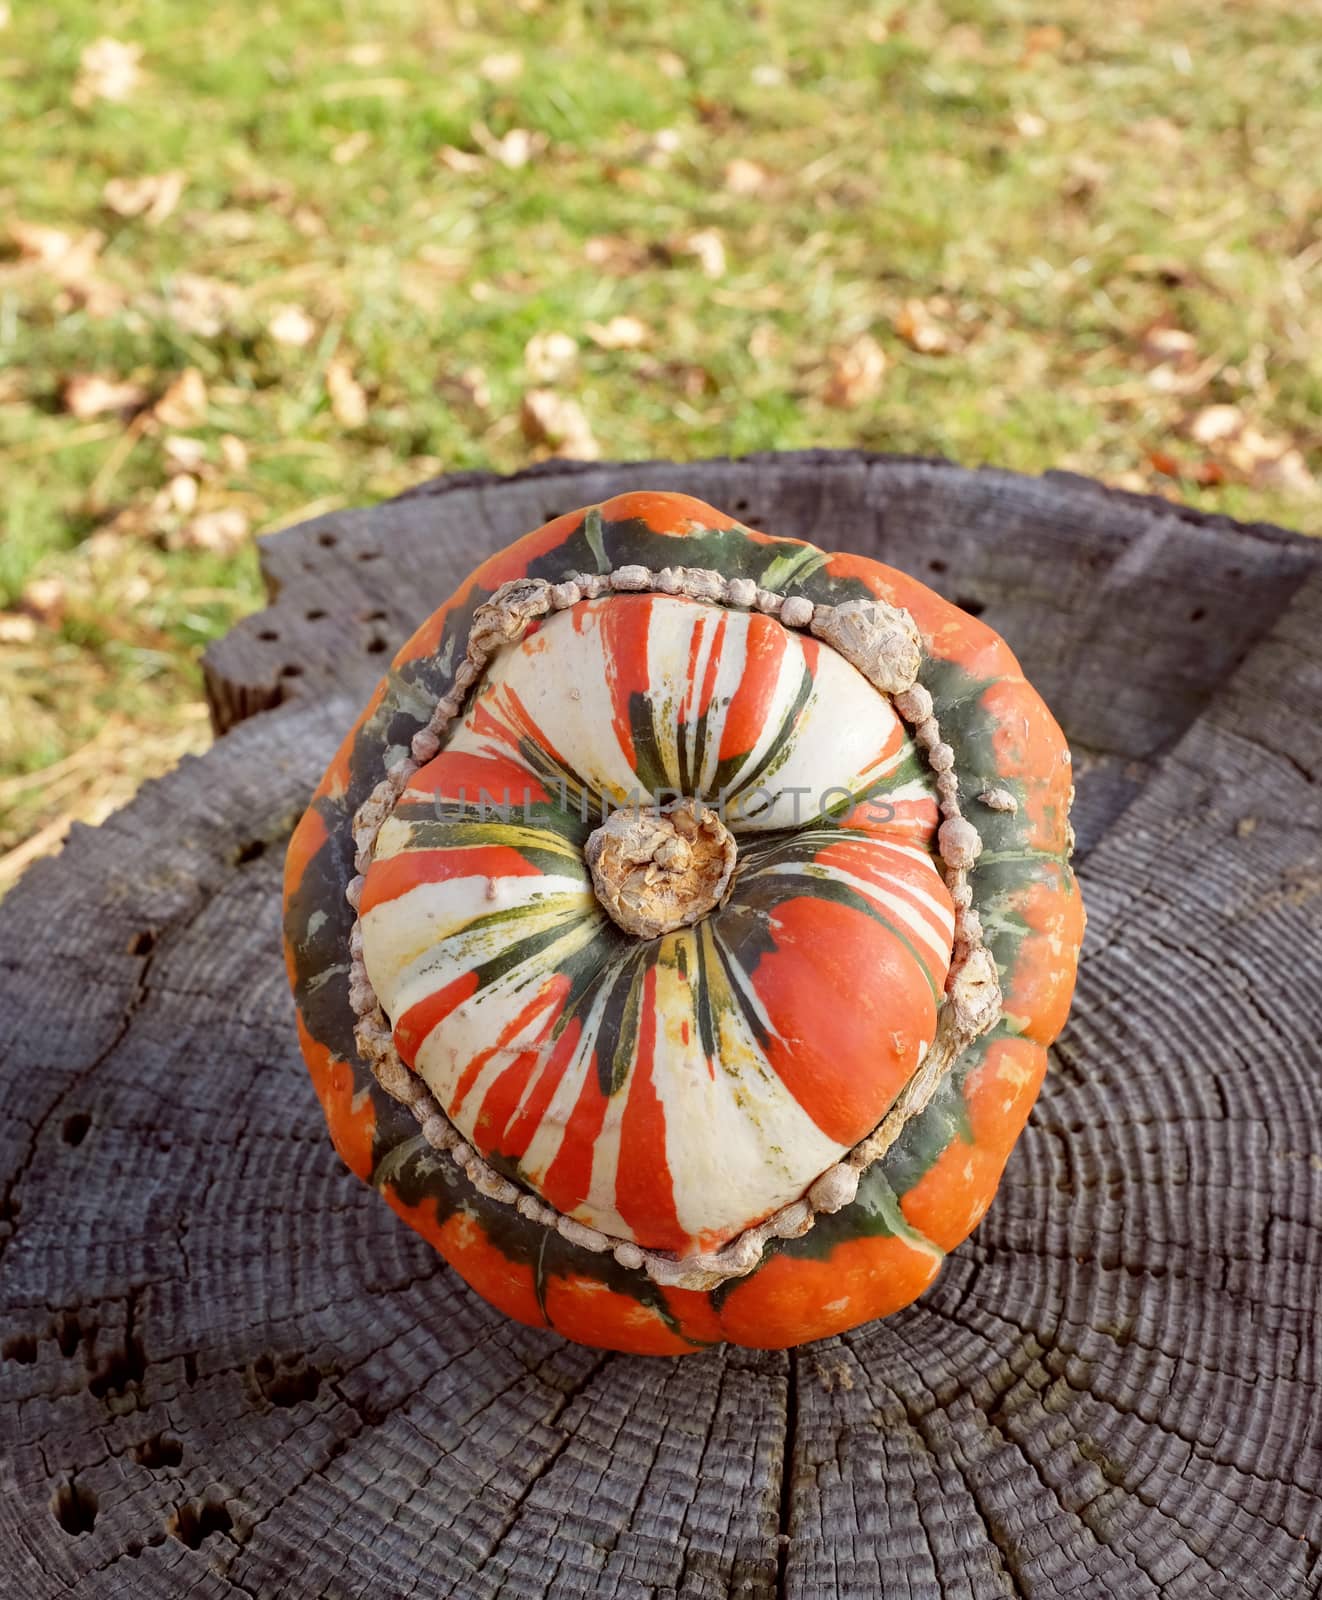 Striped Turks turban squash on a rough tree stump, grass and dry fall leaves beyond